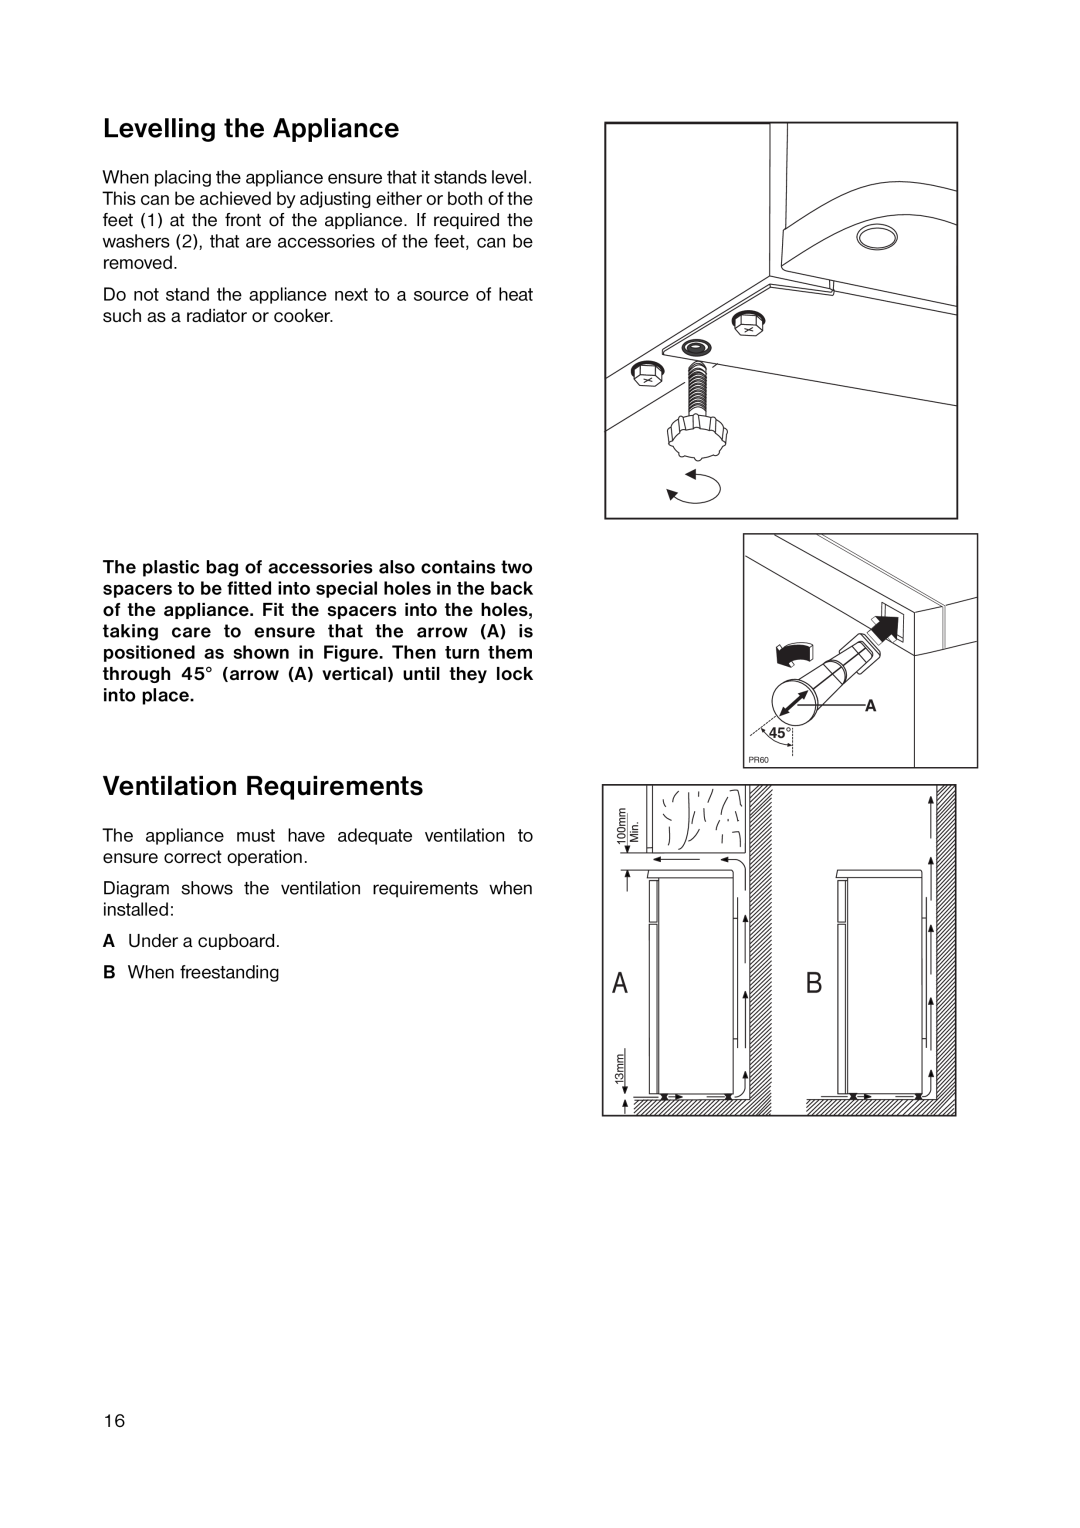 Zanussi ZRD 7846 manual Levelling the Appliance, Ventilation Requirements 